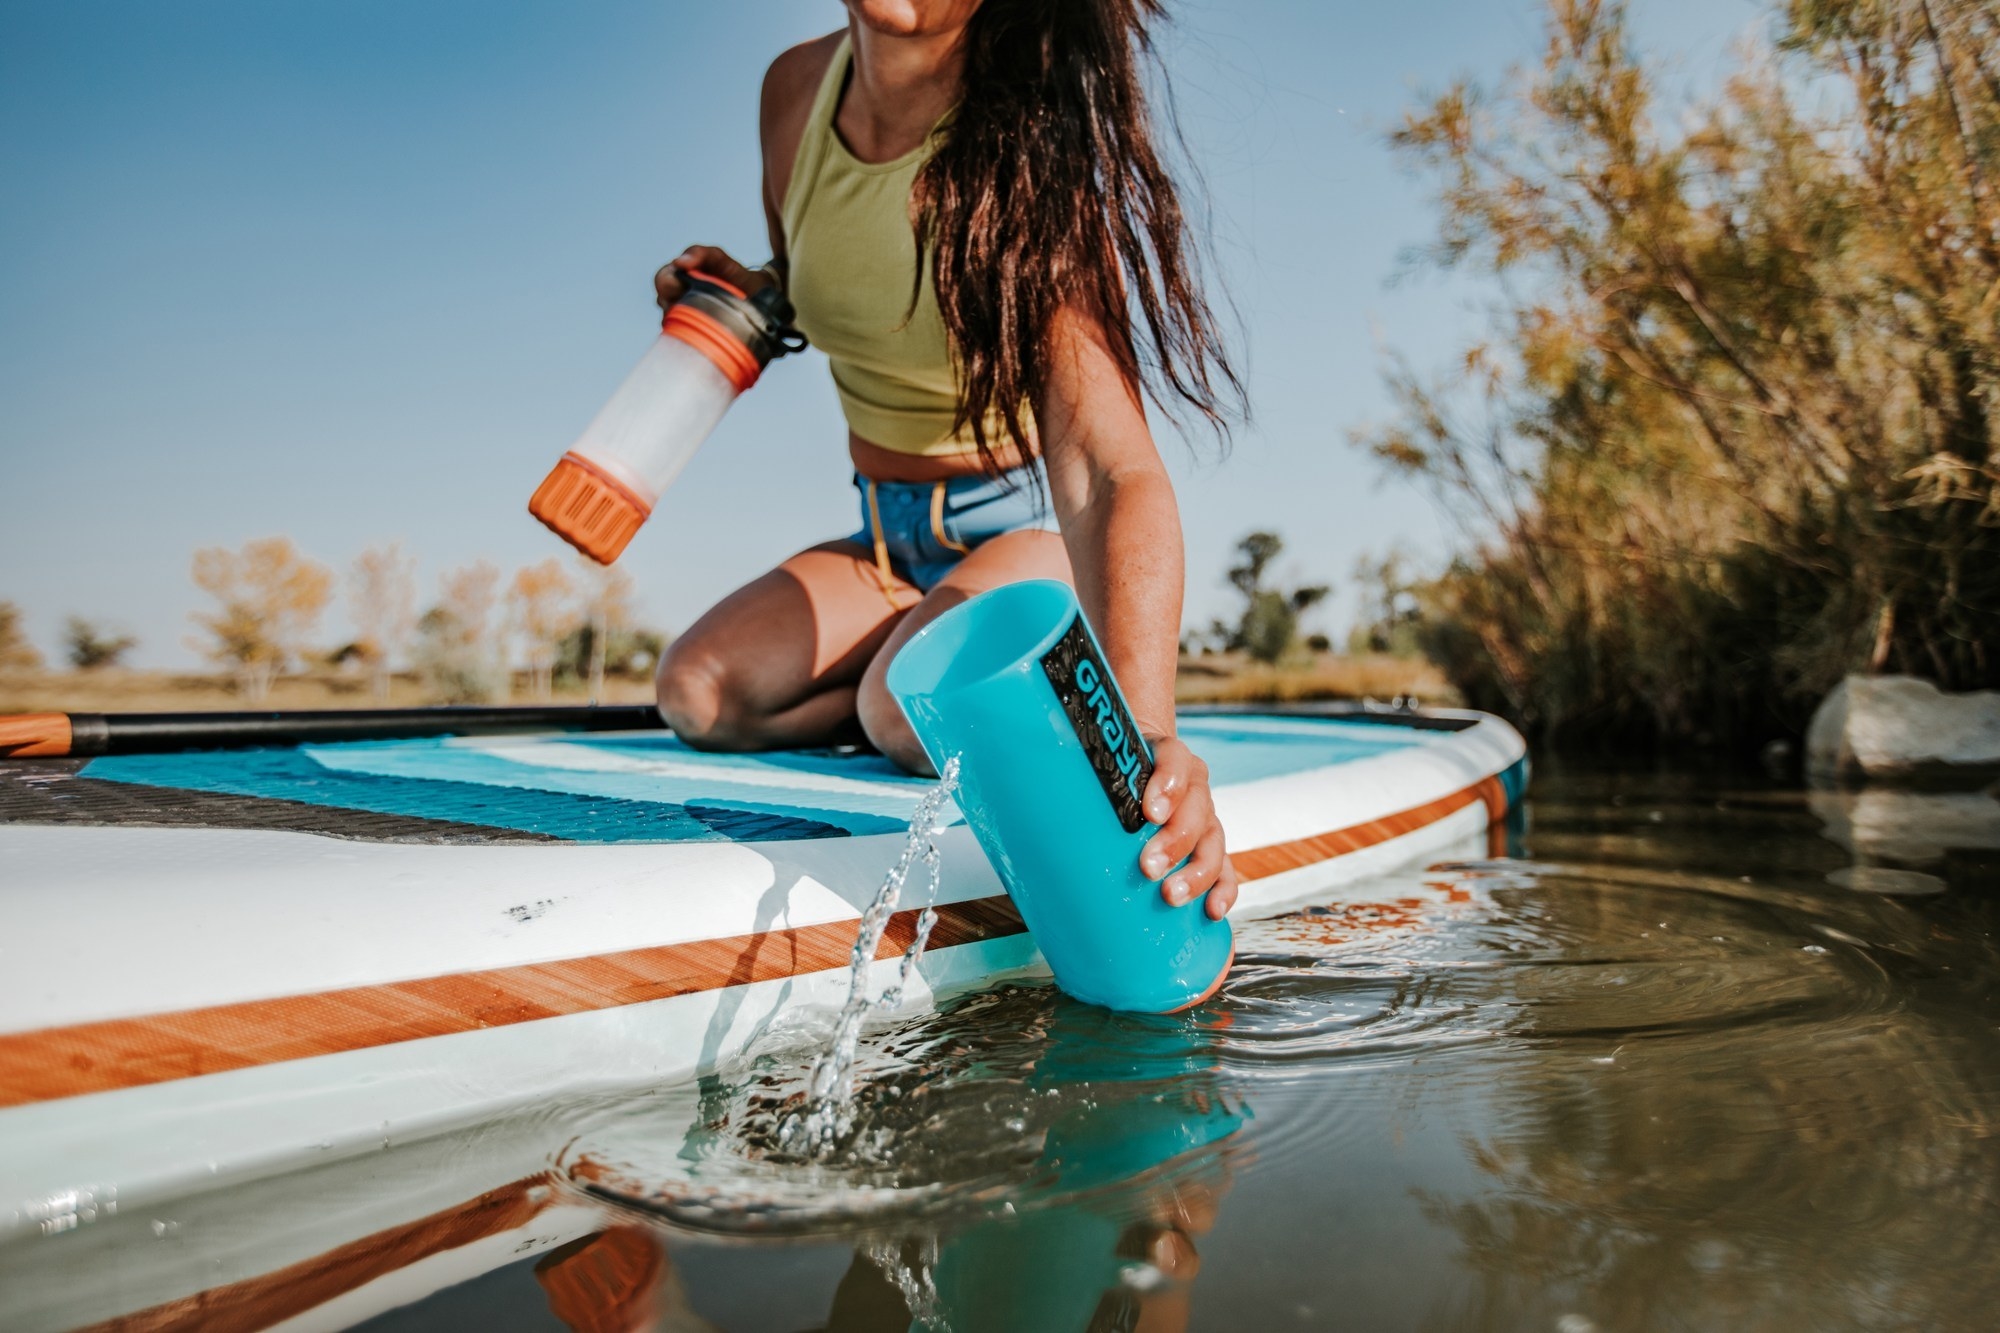 a model on a stand up paddle board getting water from a lake in the bottle